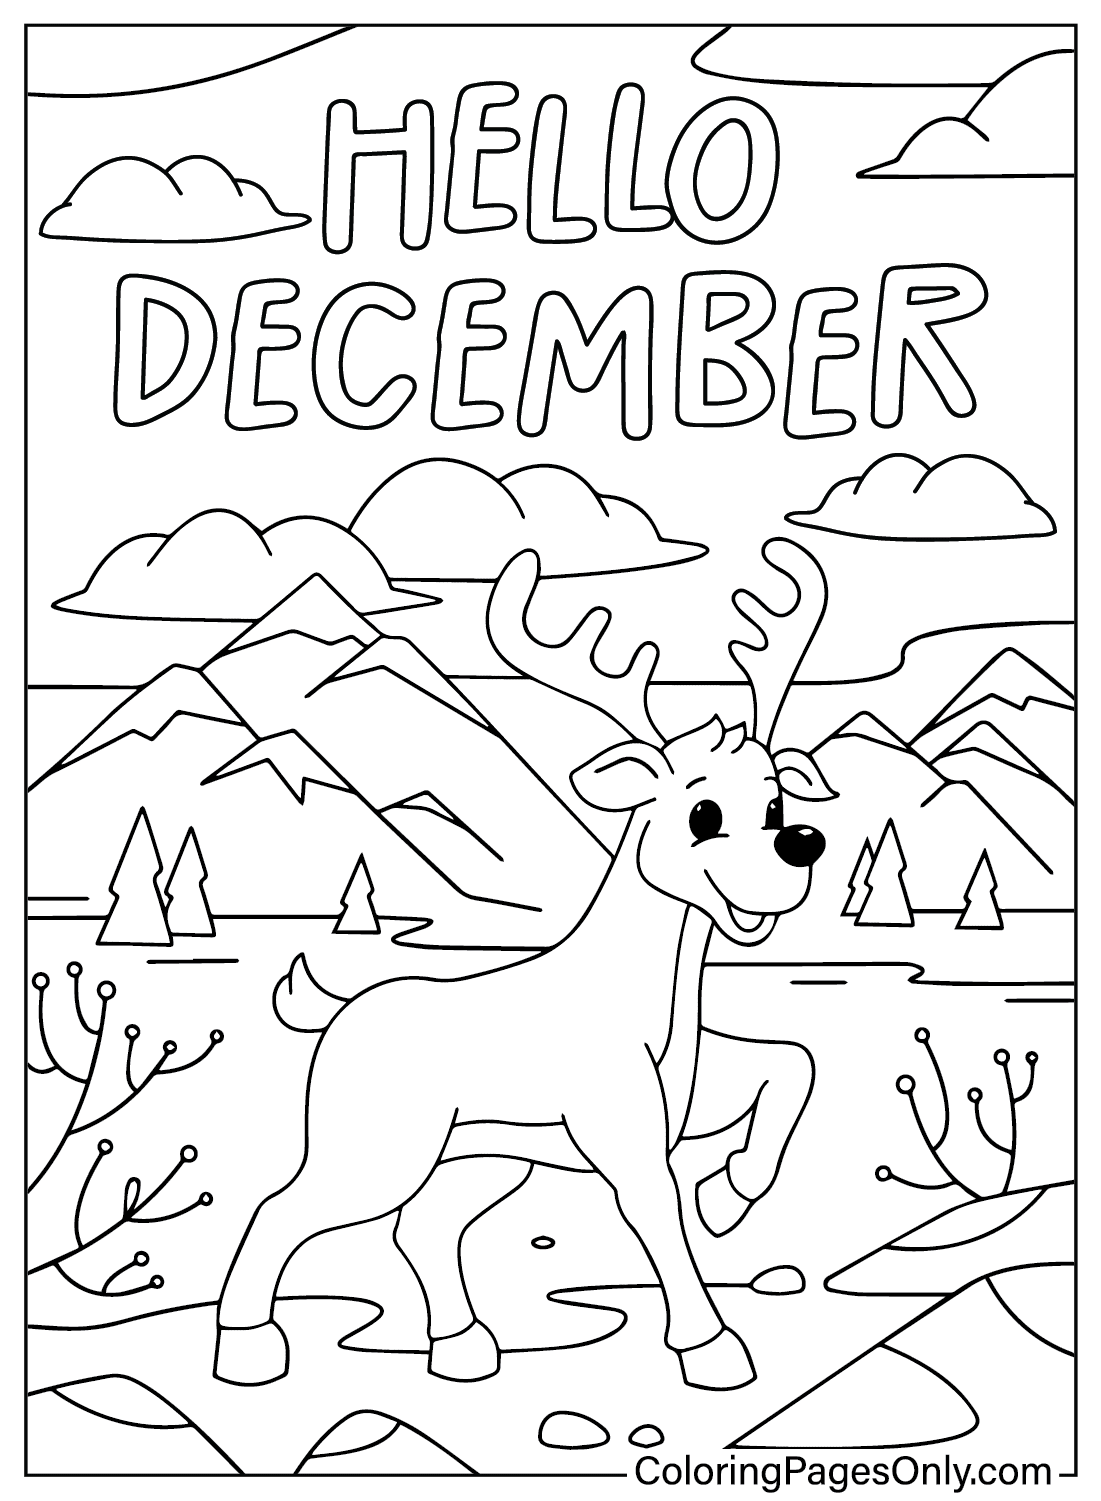 December Coloring Page to Print